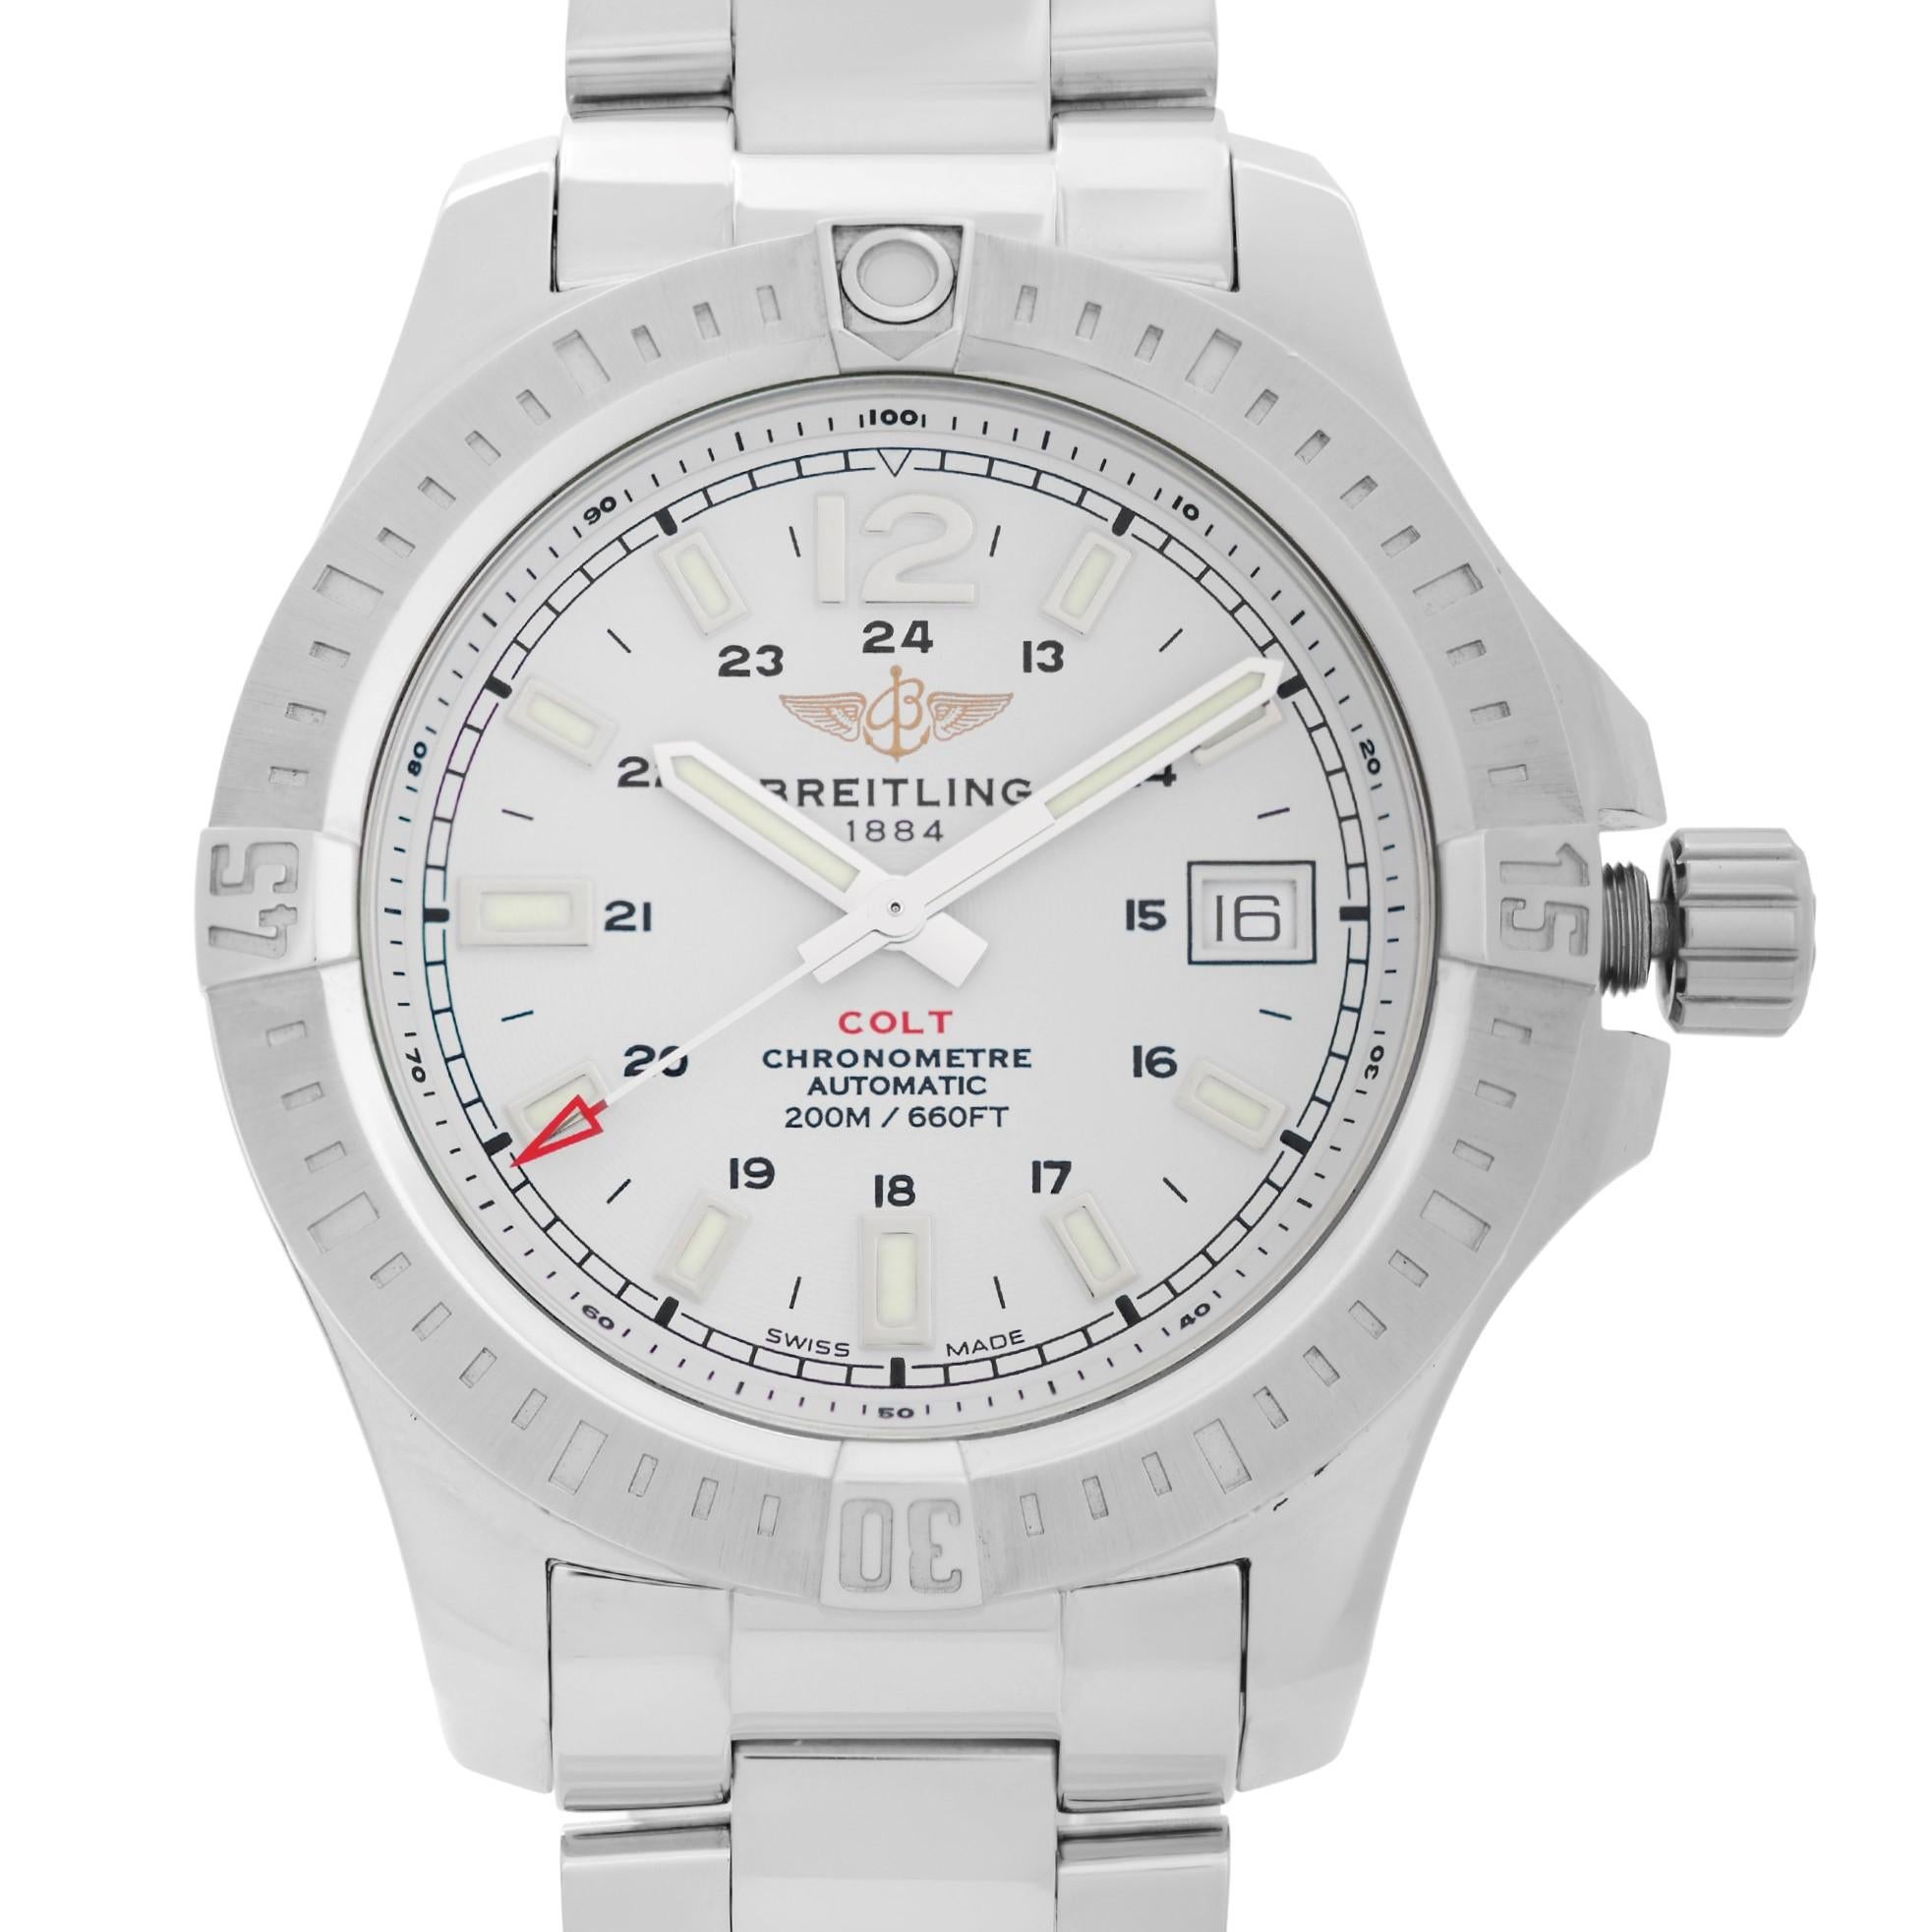 Store Display model. Breitling Colt 41 A17313101G1A1 Stainless Steel White Dial Automatic Mens Watch. This Beautiful Timepiece Features: Stainless Steel Case with a Stainless Steel Bracelet, Rotating Stainless Steel Bezel, White Dial with Luminous